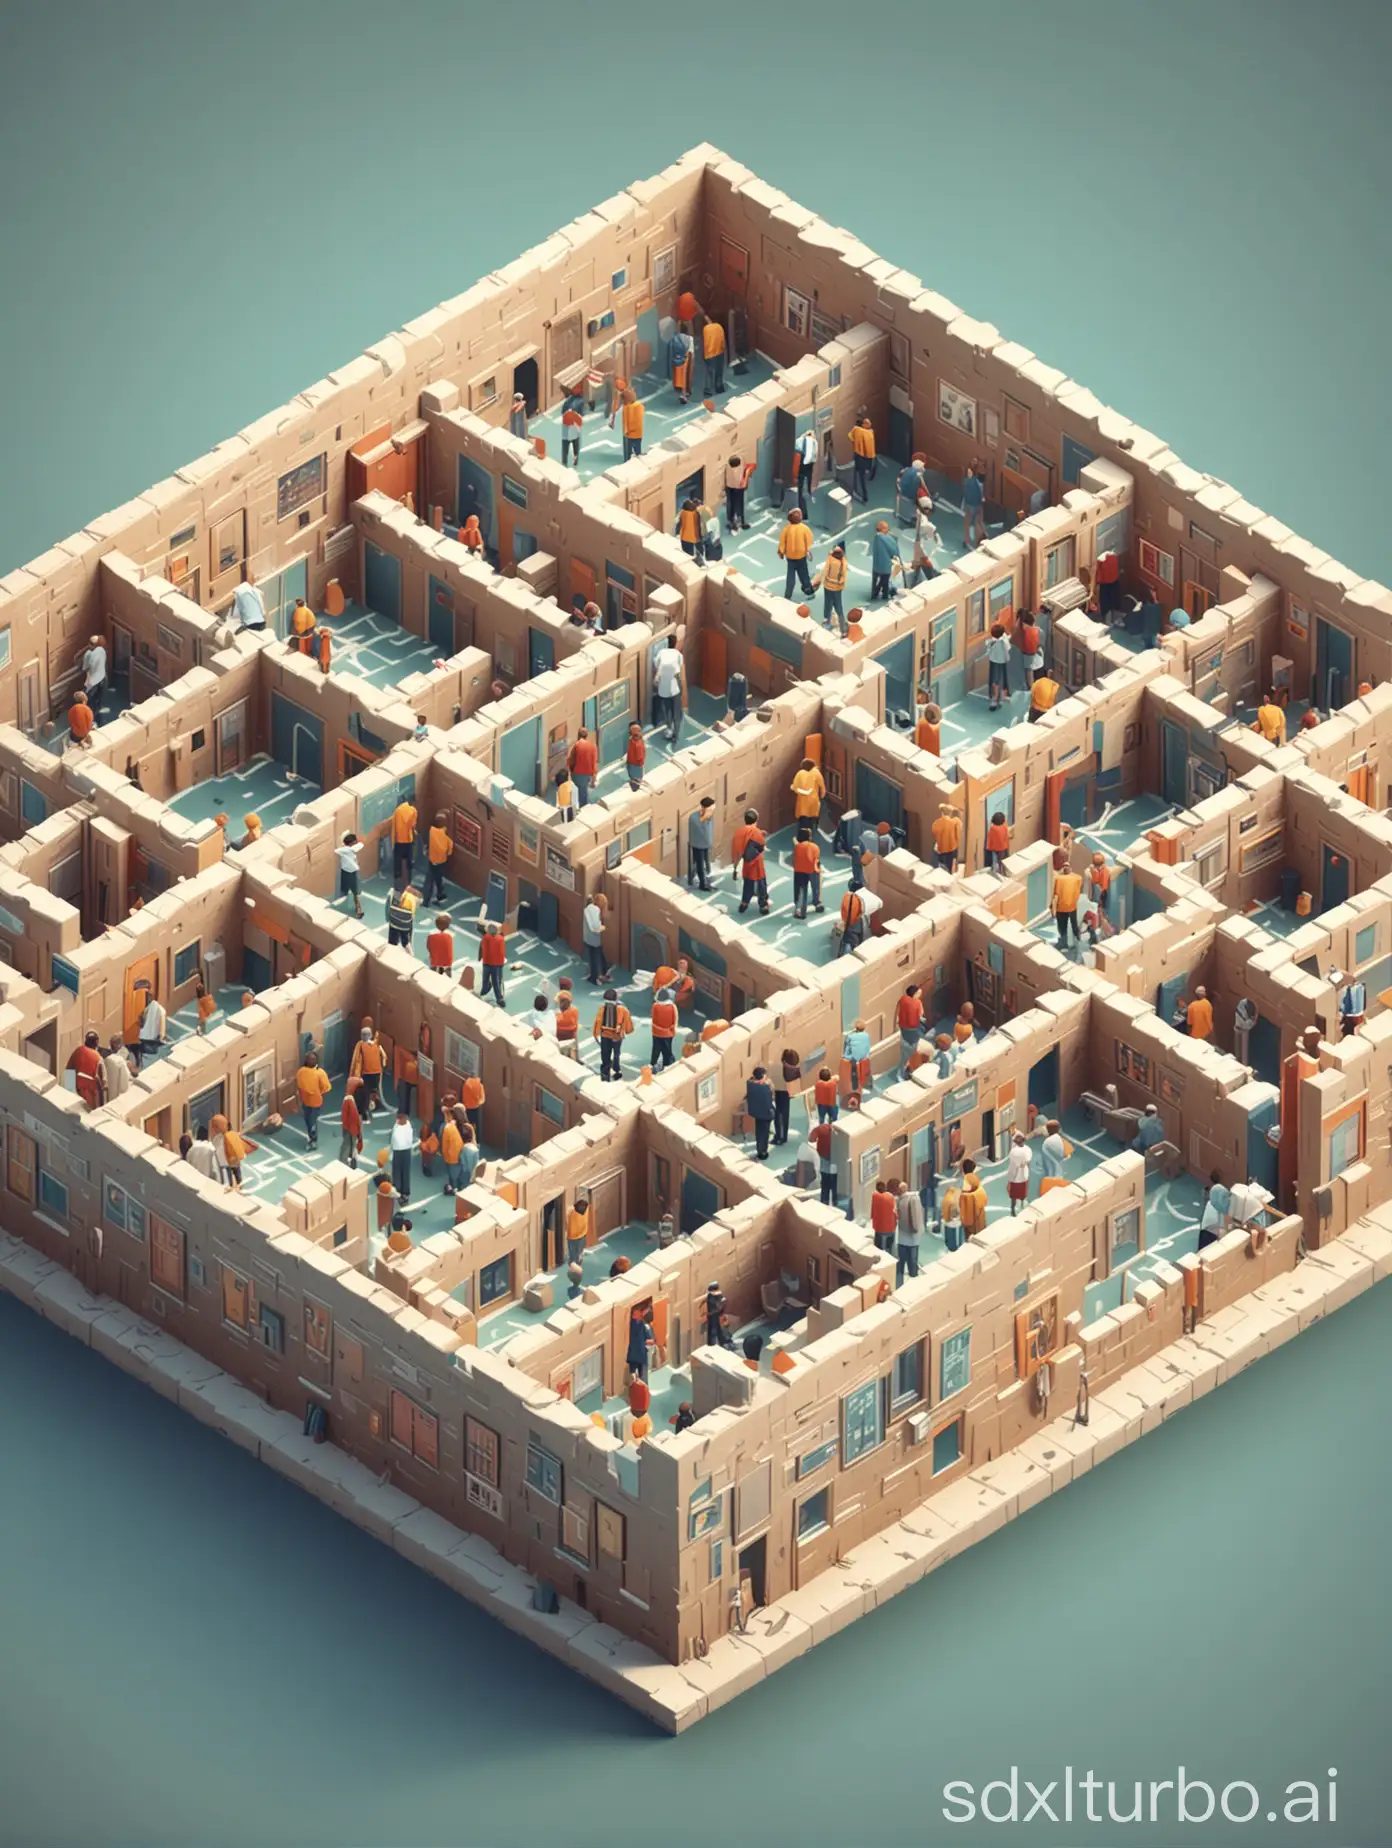 Isometric-Maze-School-for-Young-Students-LowPoly-Style-Education